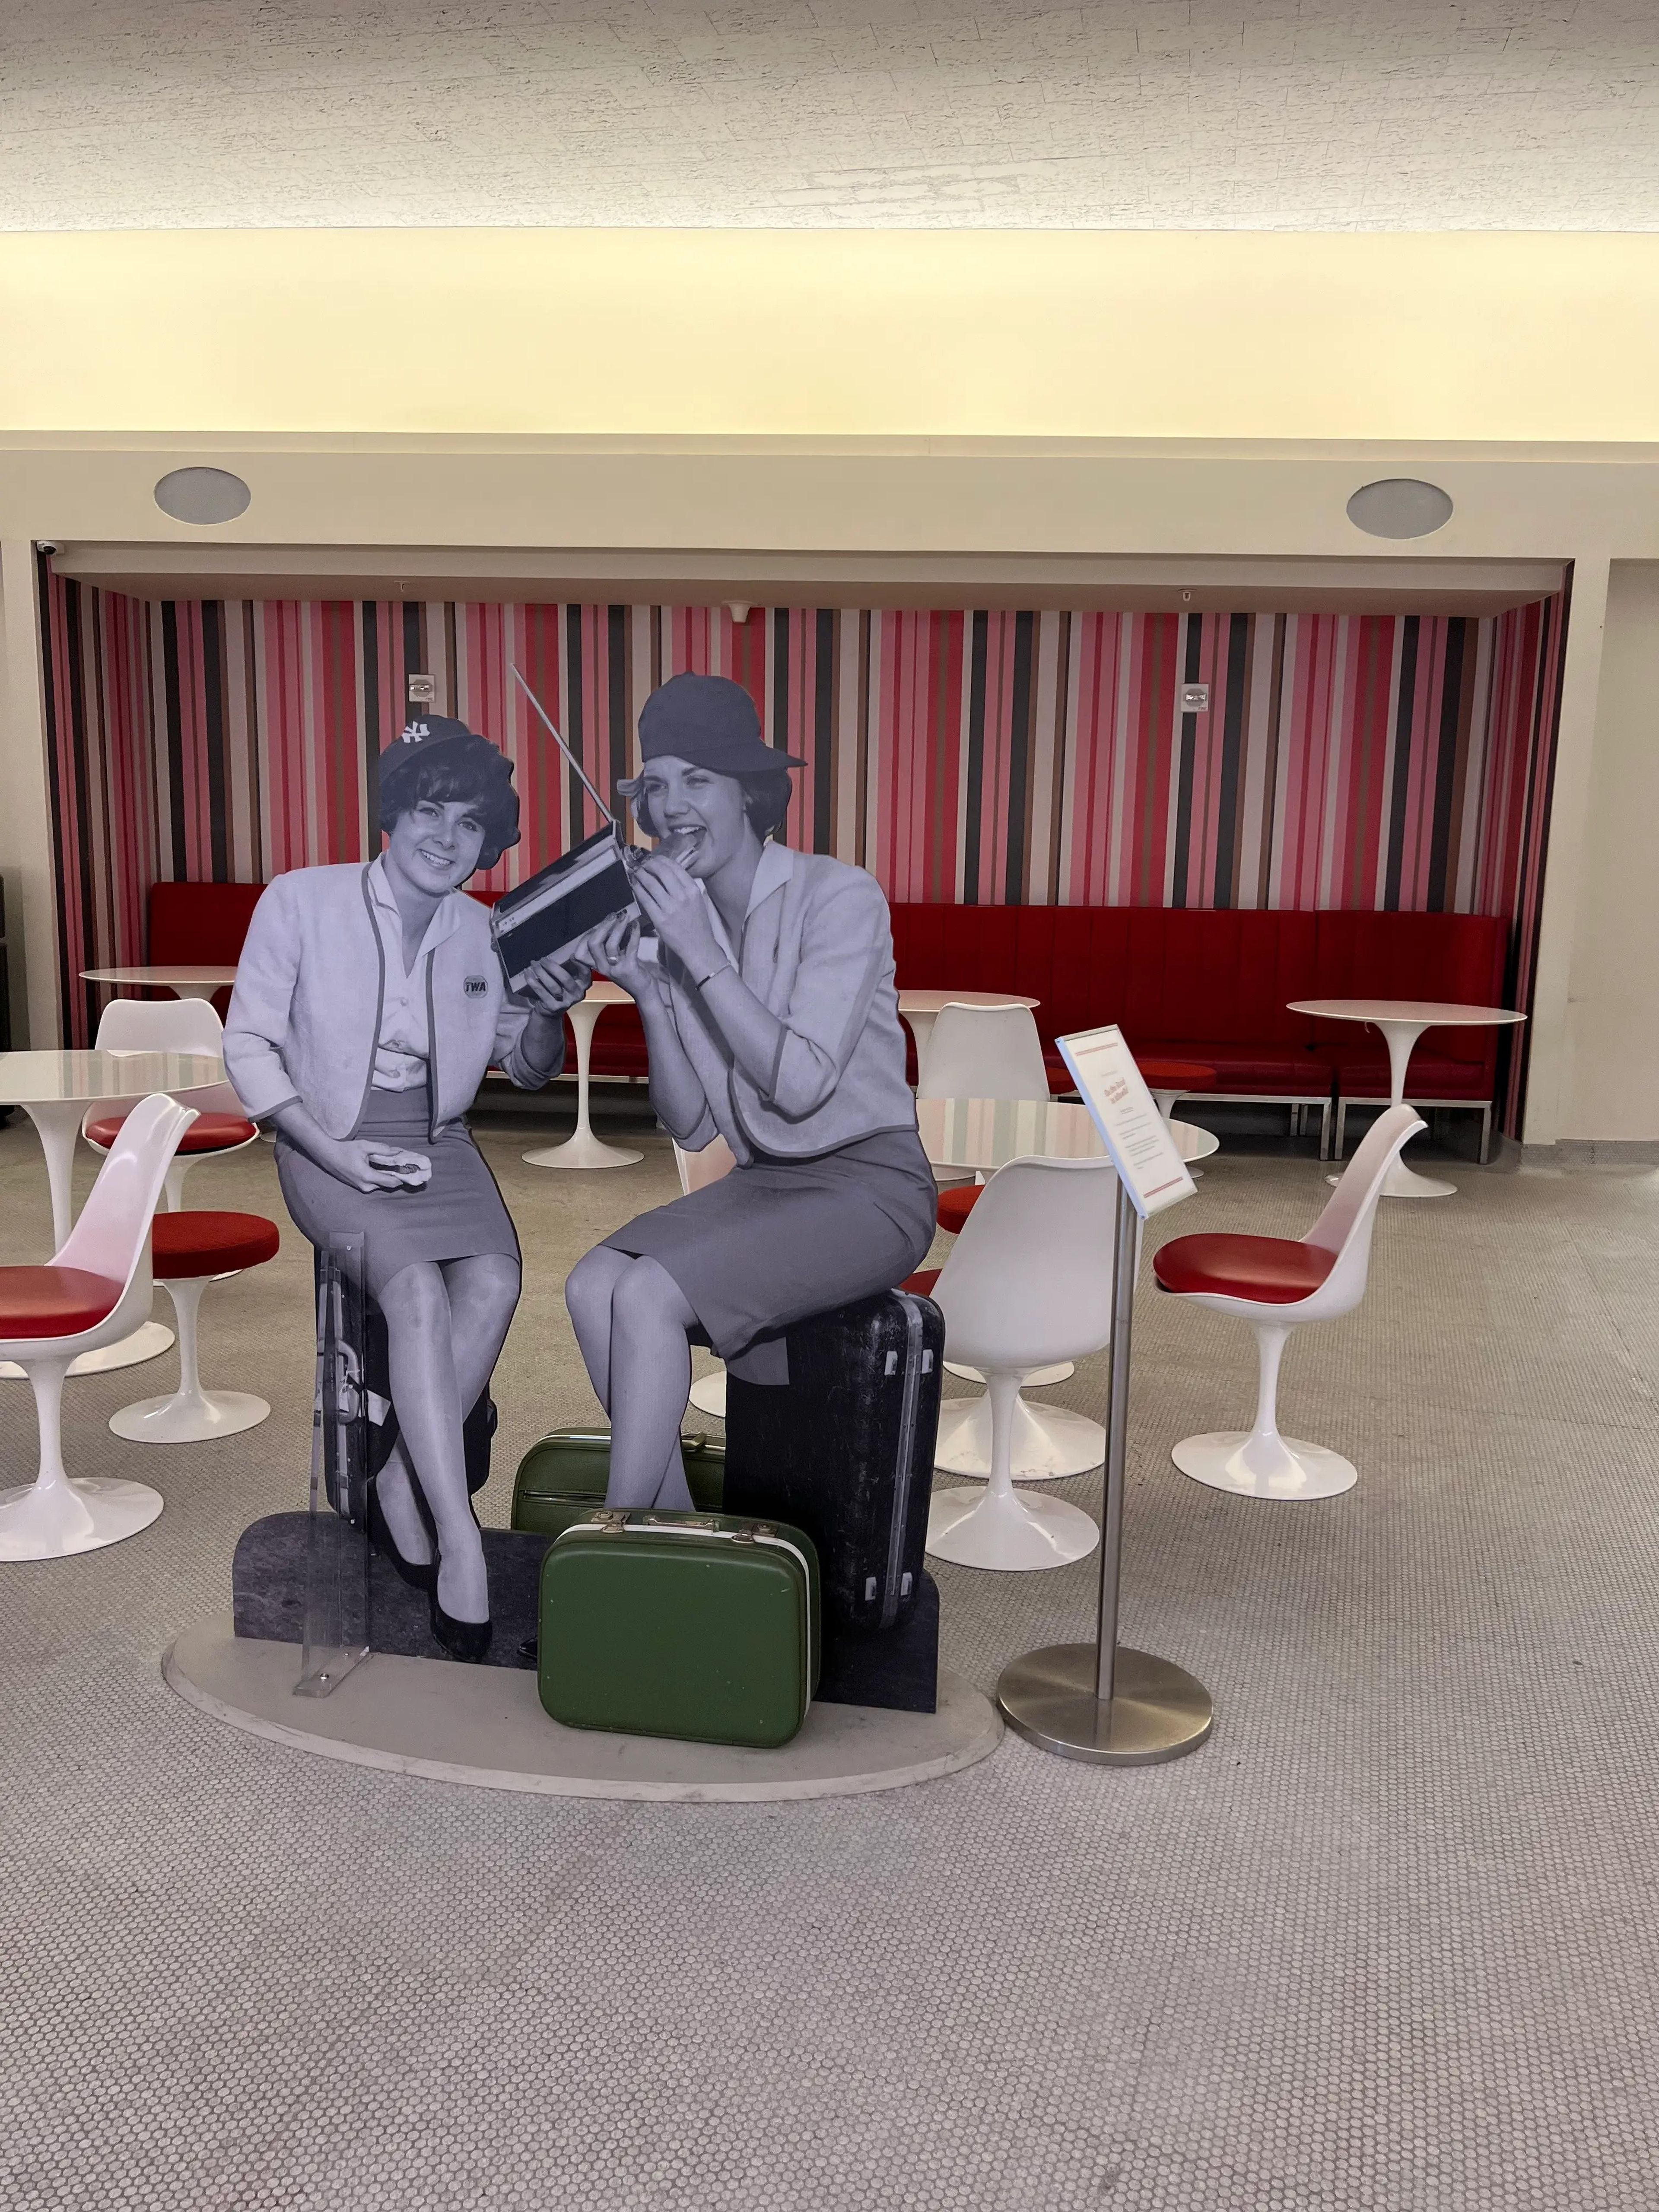 TWA Hotel posters of people in 60s clothes